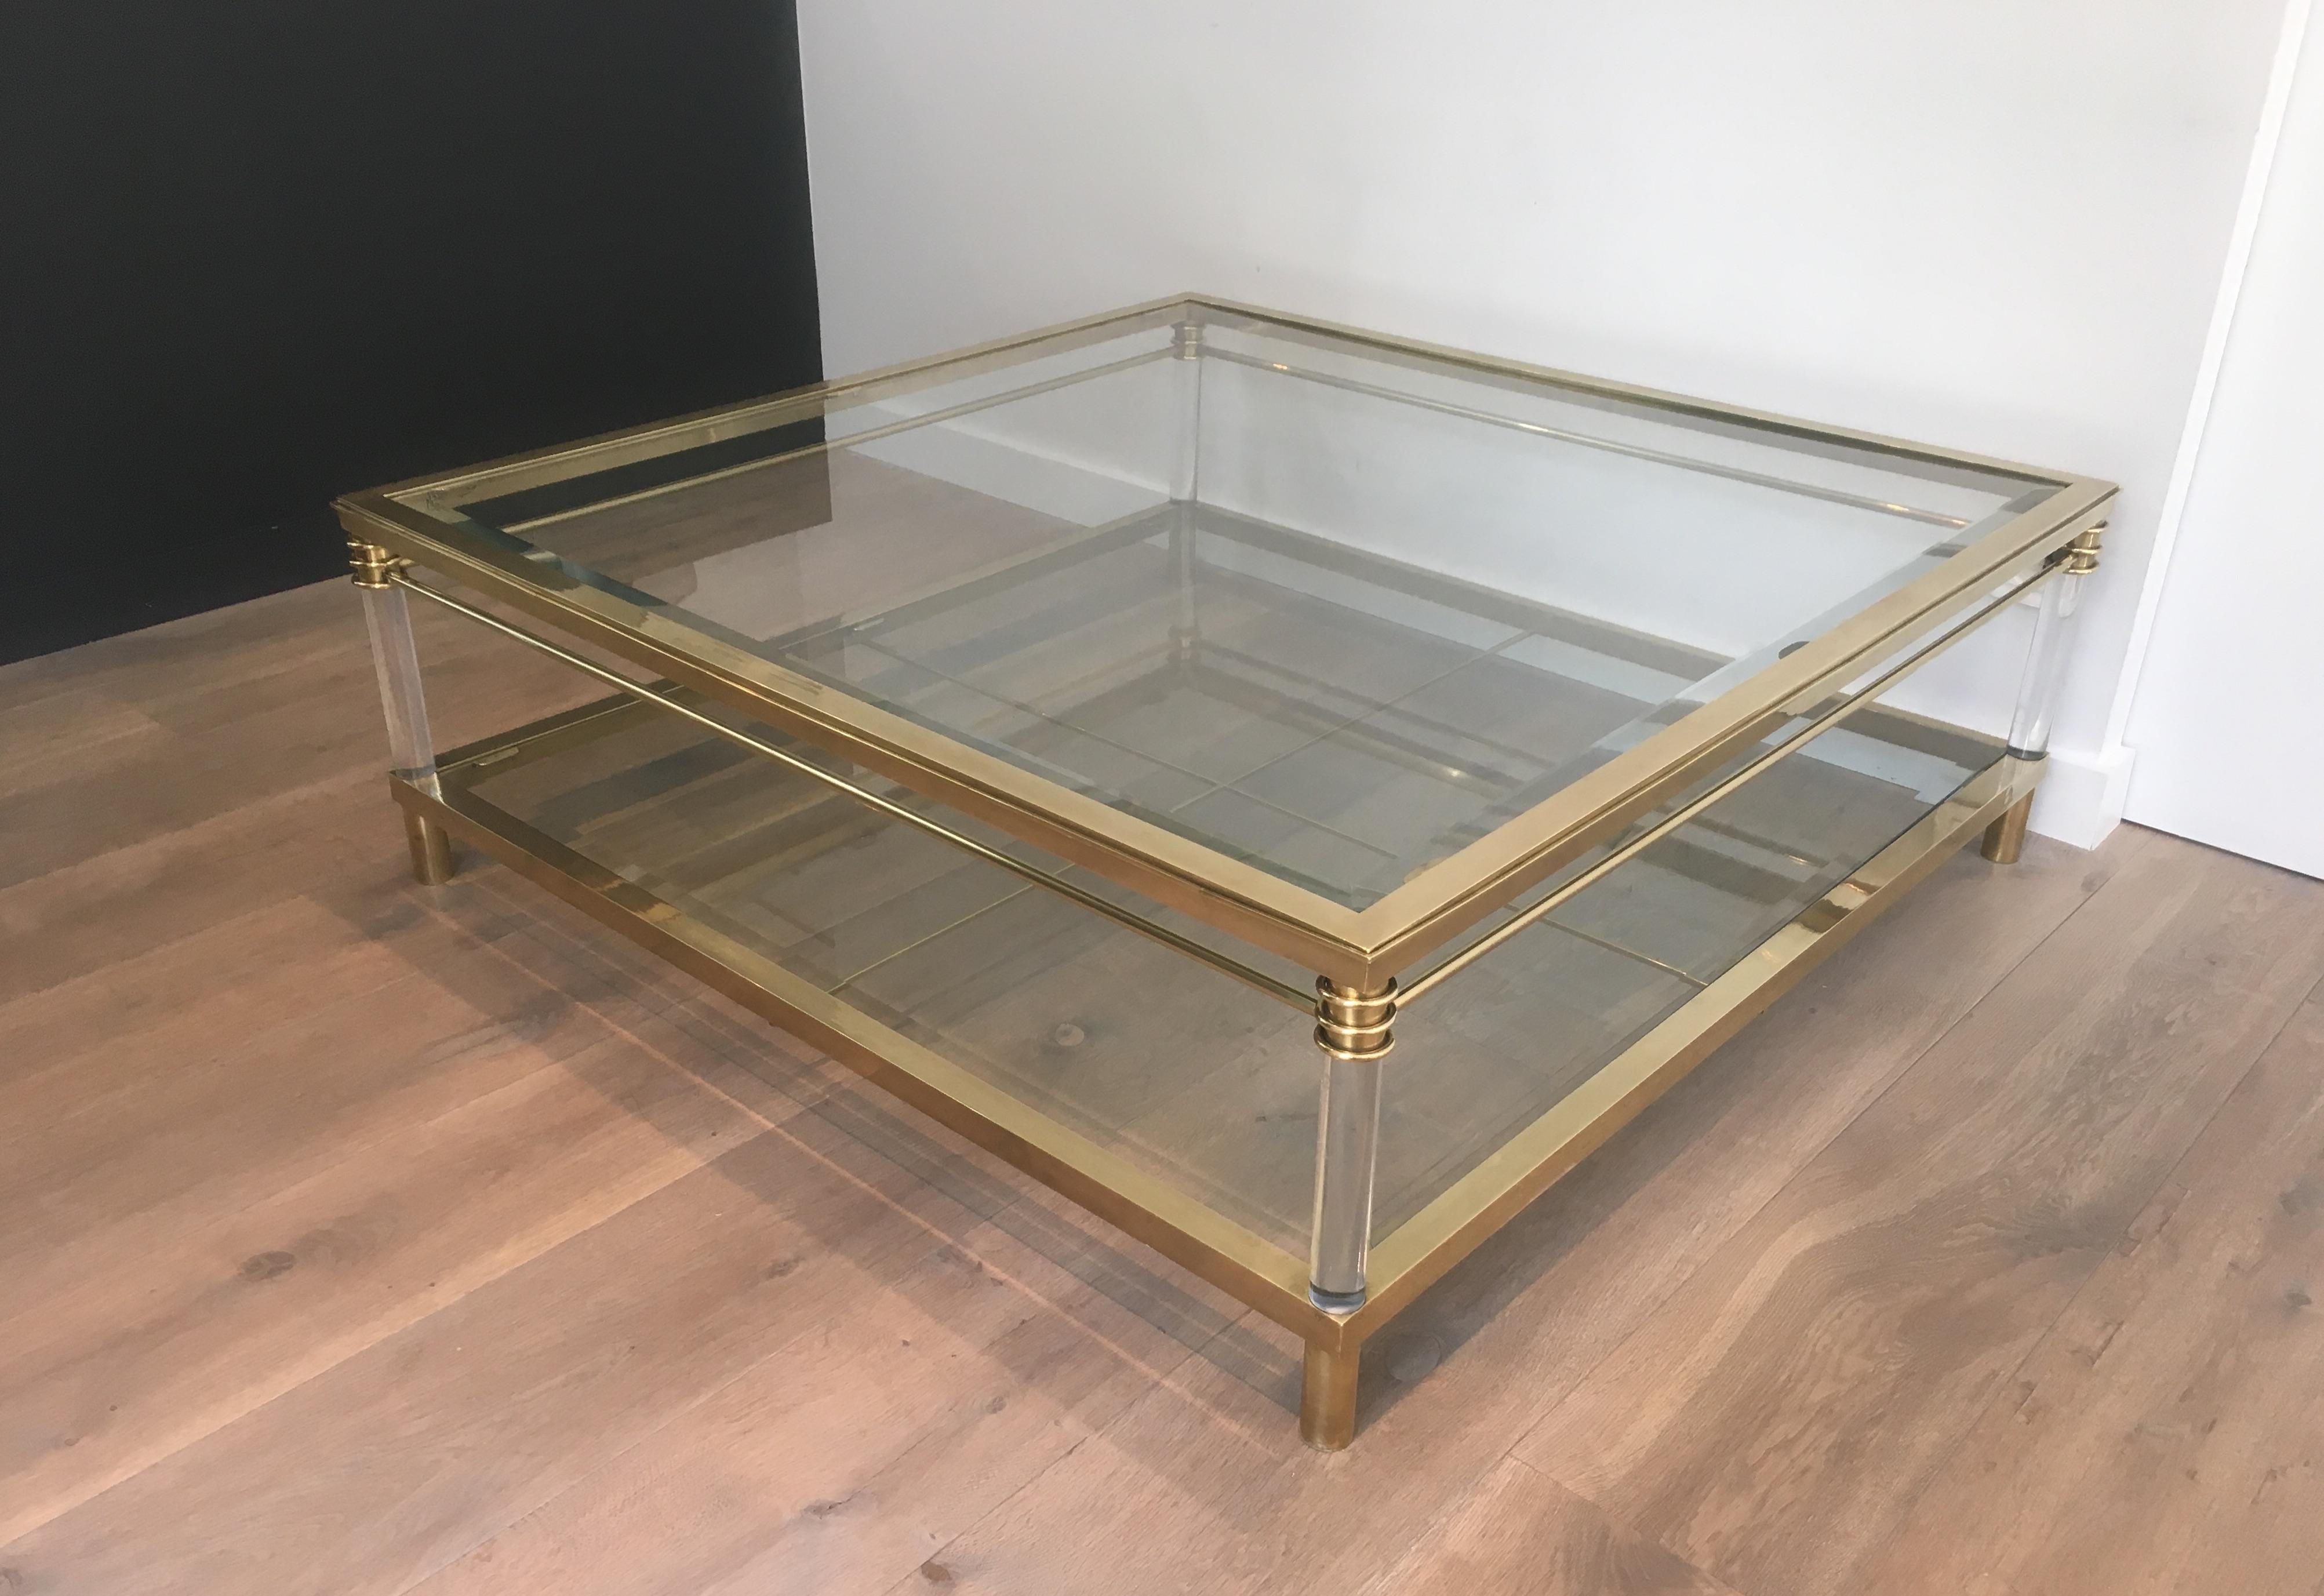 This rare and large square coffee table is made of brass and Lucite. This is a very nice model, very elegant and fine. This is a French work from 1970s.